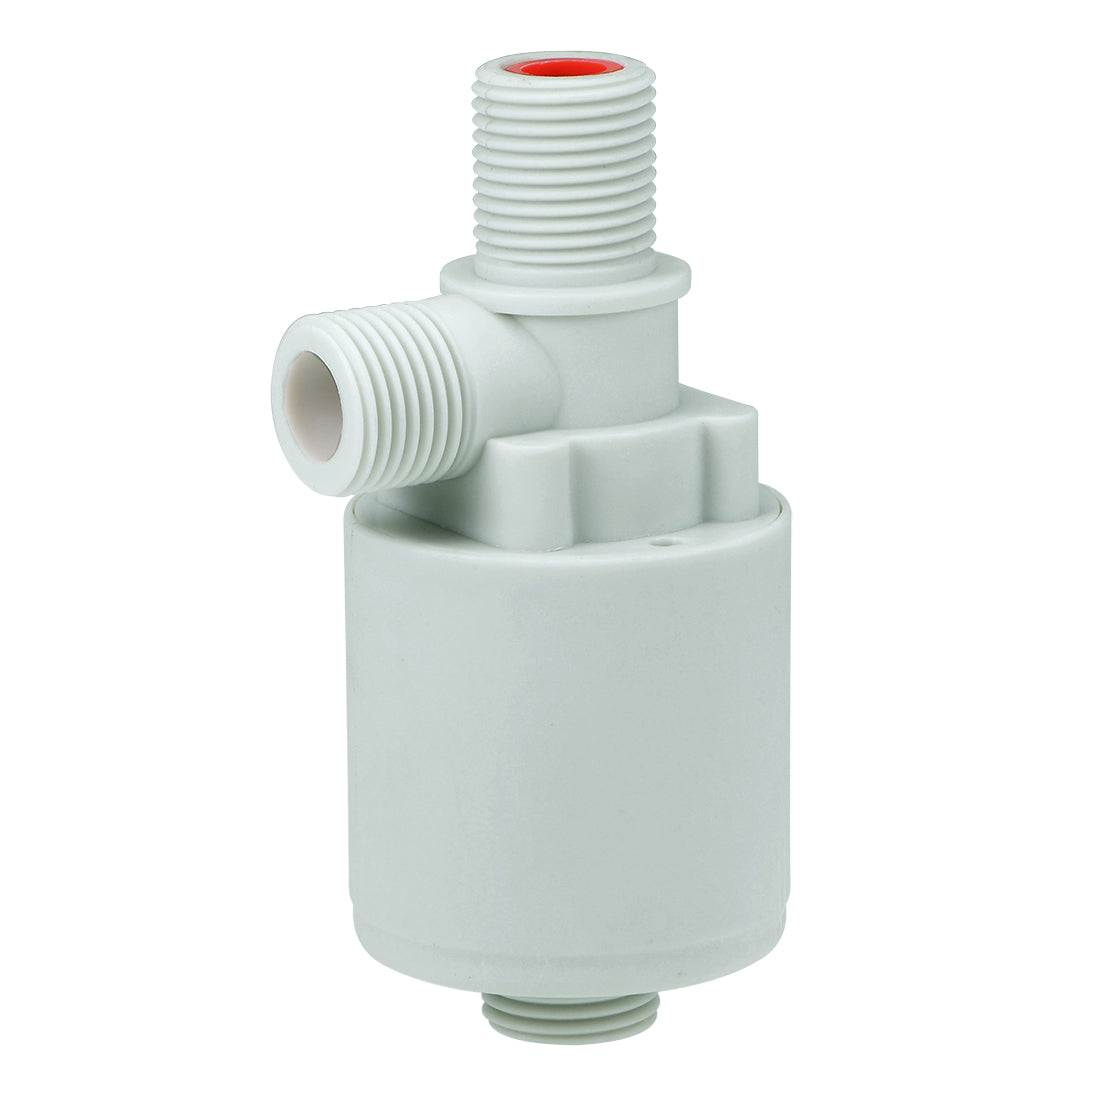 uxcell Uxcell Float Ball Valve G1/2 Thread Plastic Vertical Exterior Water Liquid Level Control Sensor Automatic with Filter